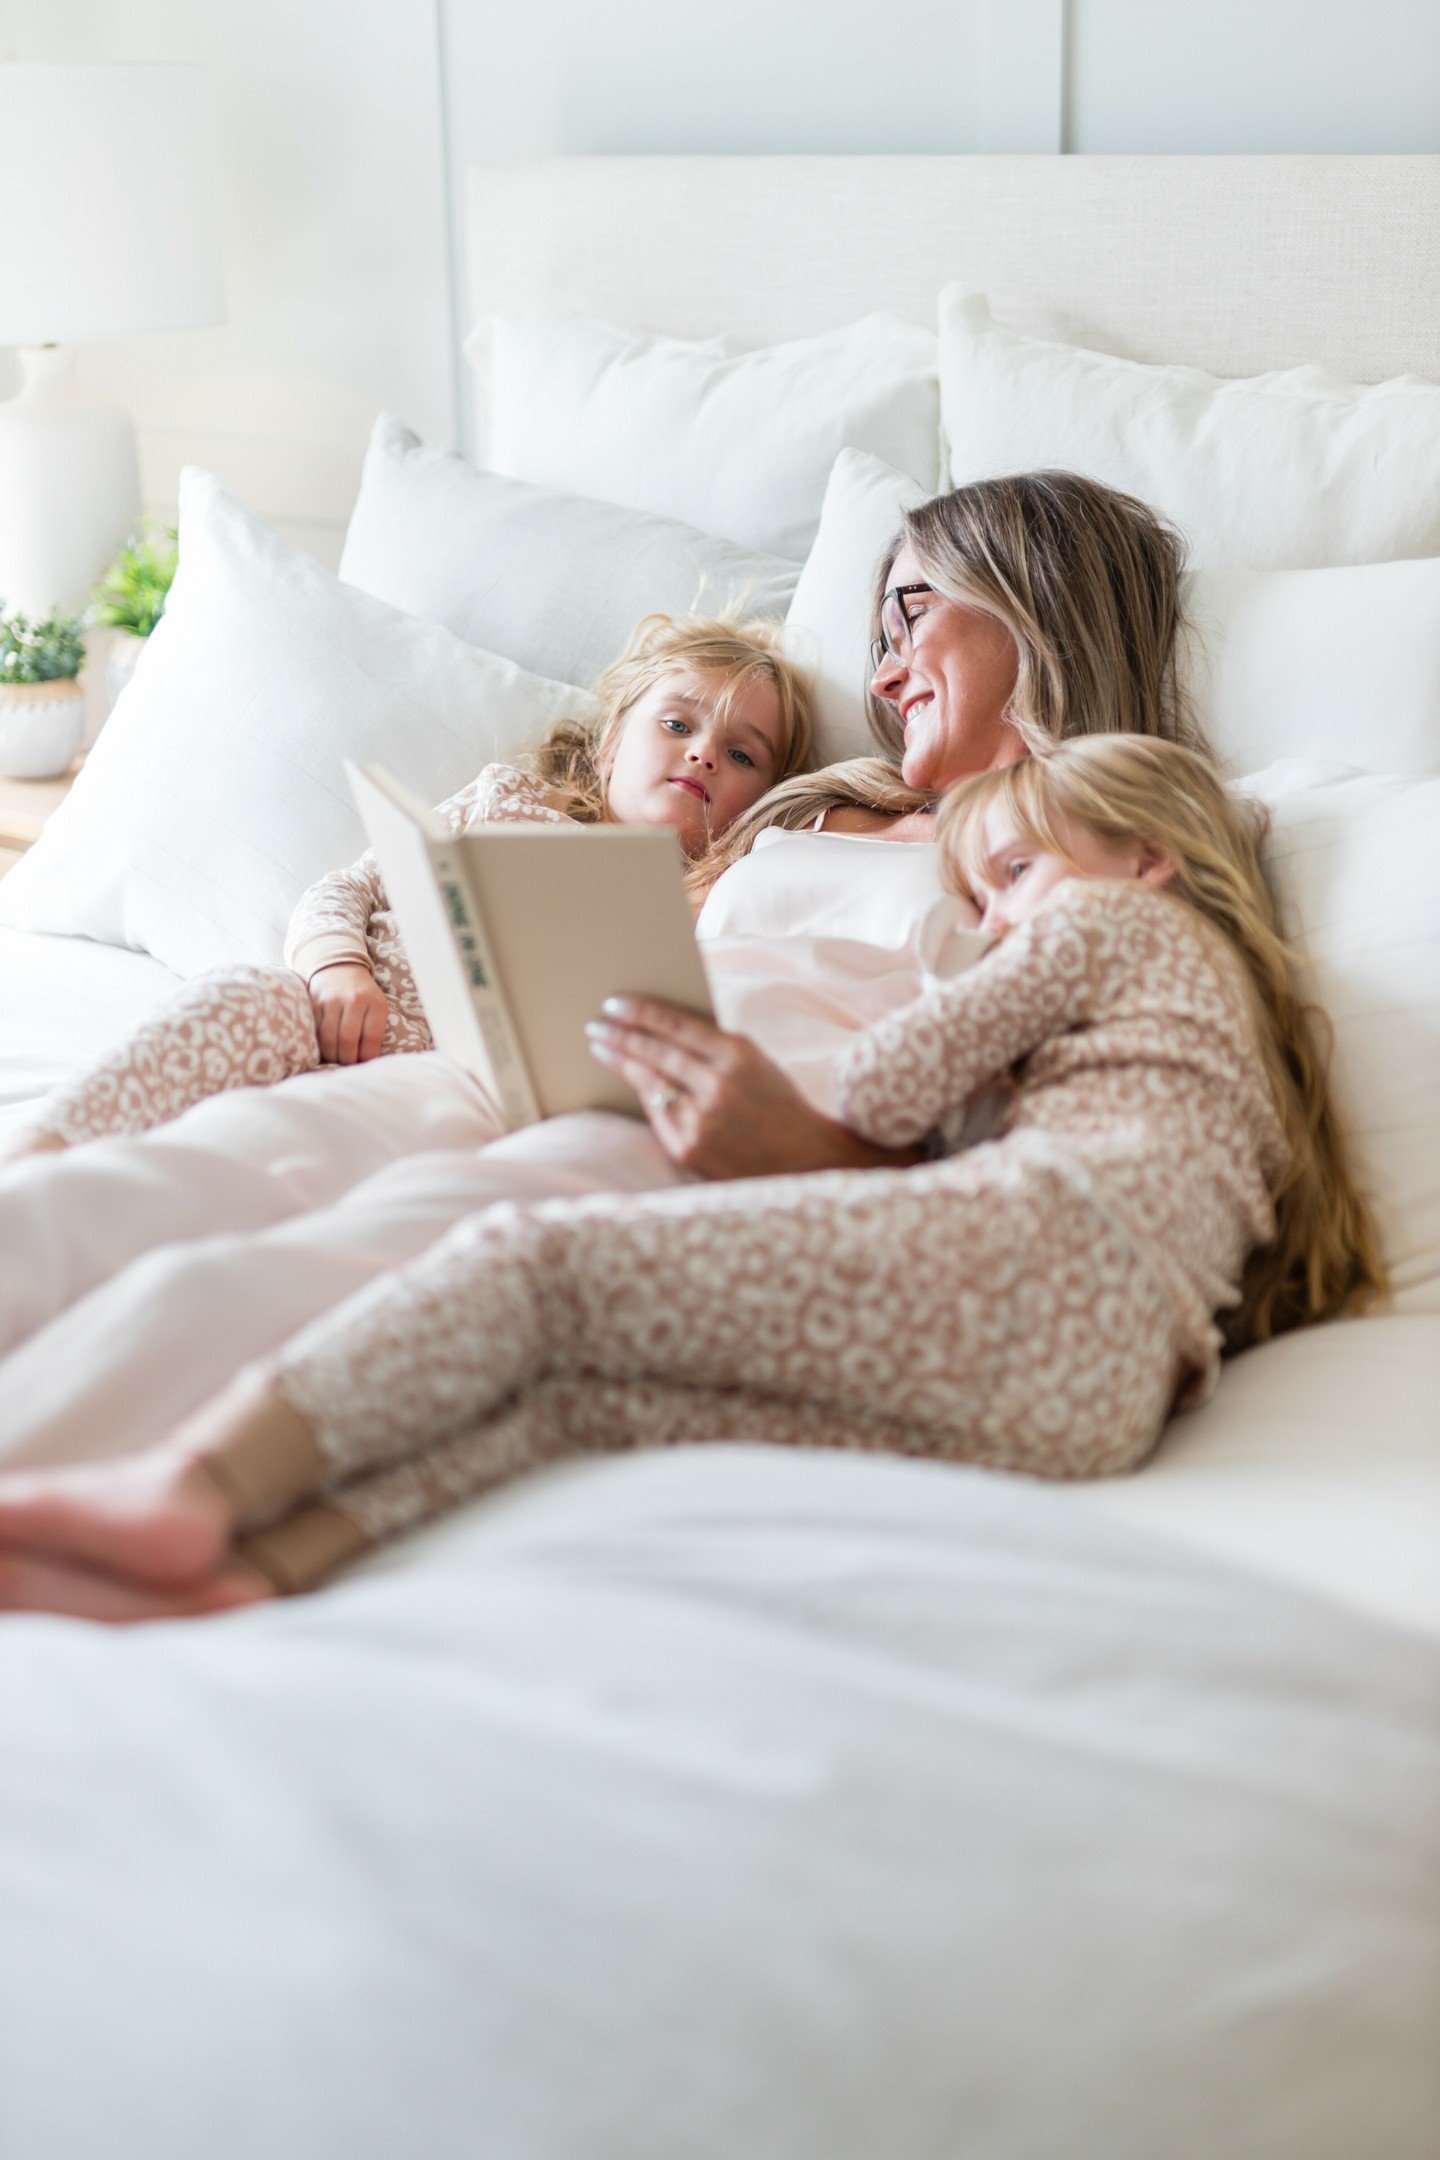 Here's to the extraordinary women who shape our lives with love, sacrifice, and boundless strength. 

Happy Mother's Day to all the incredible moms out there! 💐💖
.
.
.
.
.
#happymothersday #Foxridgehomes #interiordesigninspo #bedroomdesign #interio